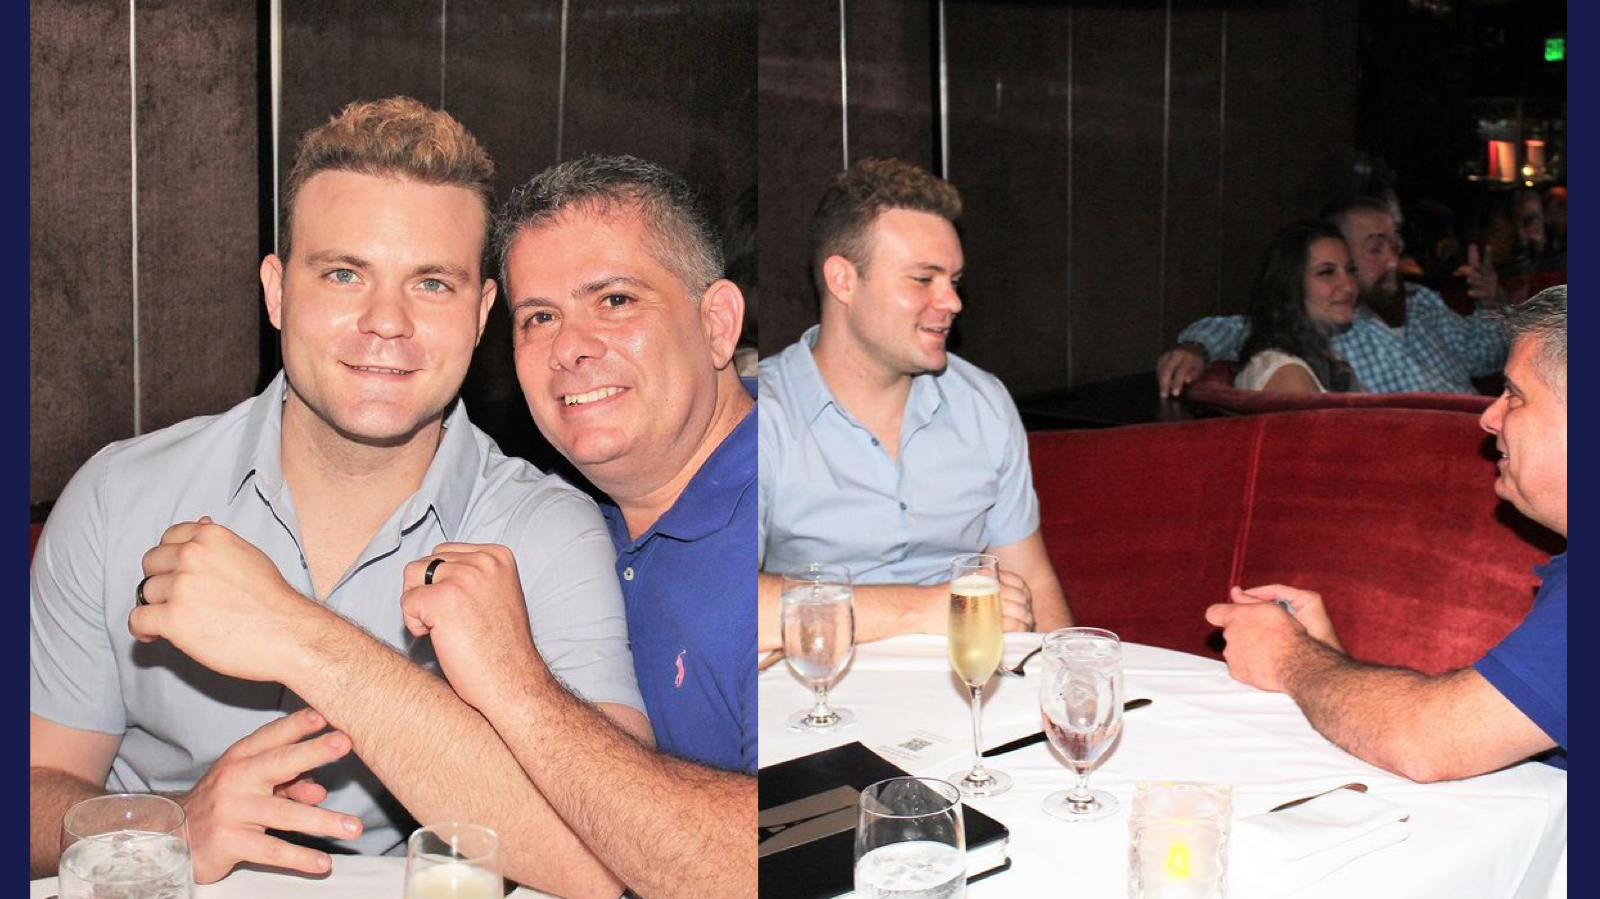 Jonathan Cottrell and Erik Braverman announced their engagement this weekend.